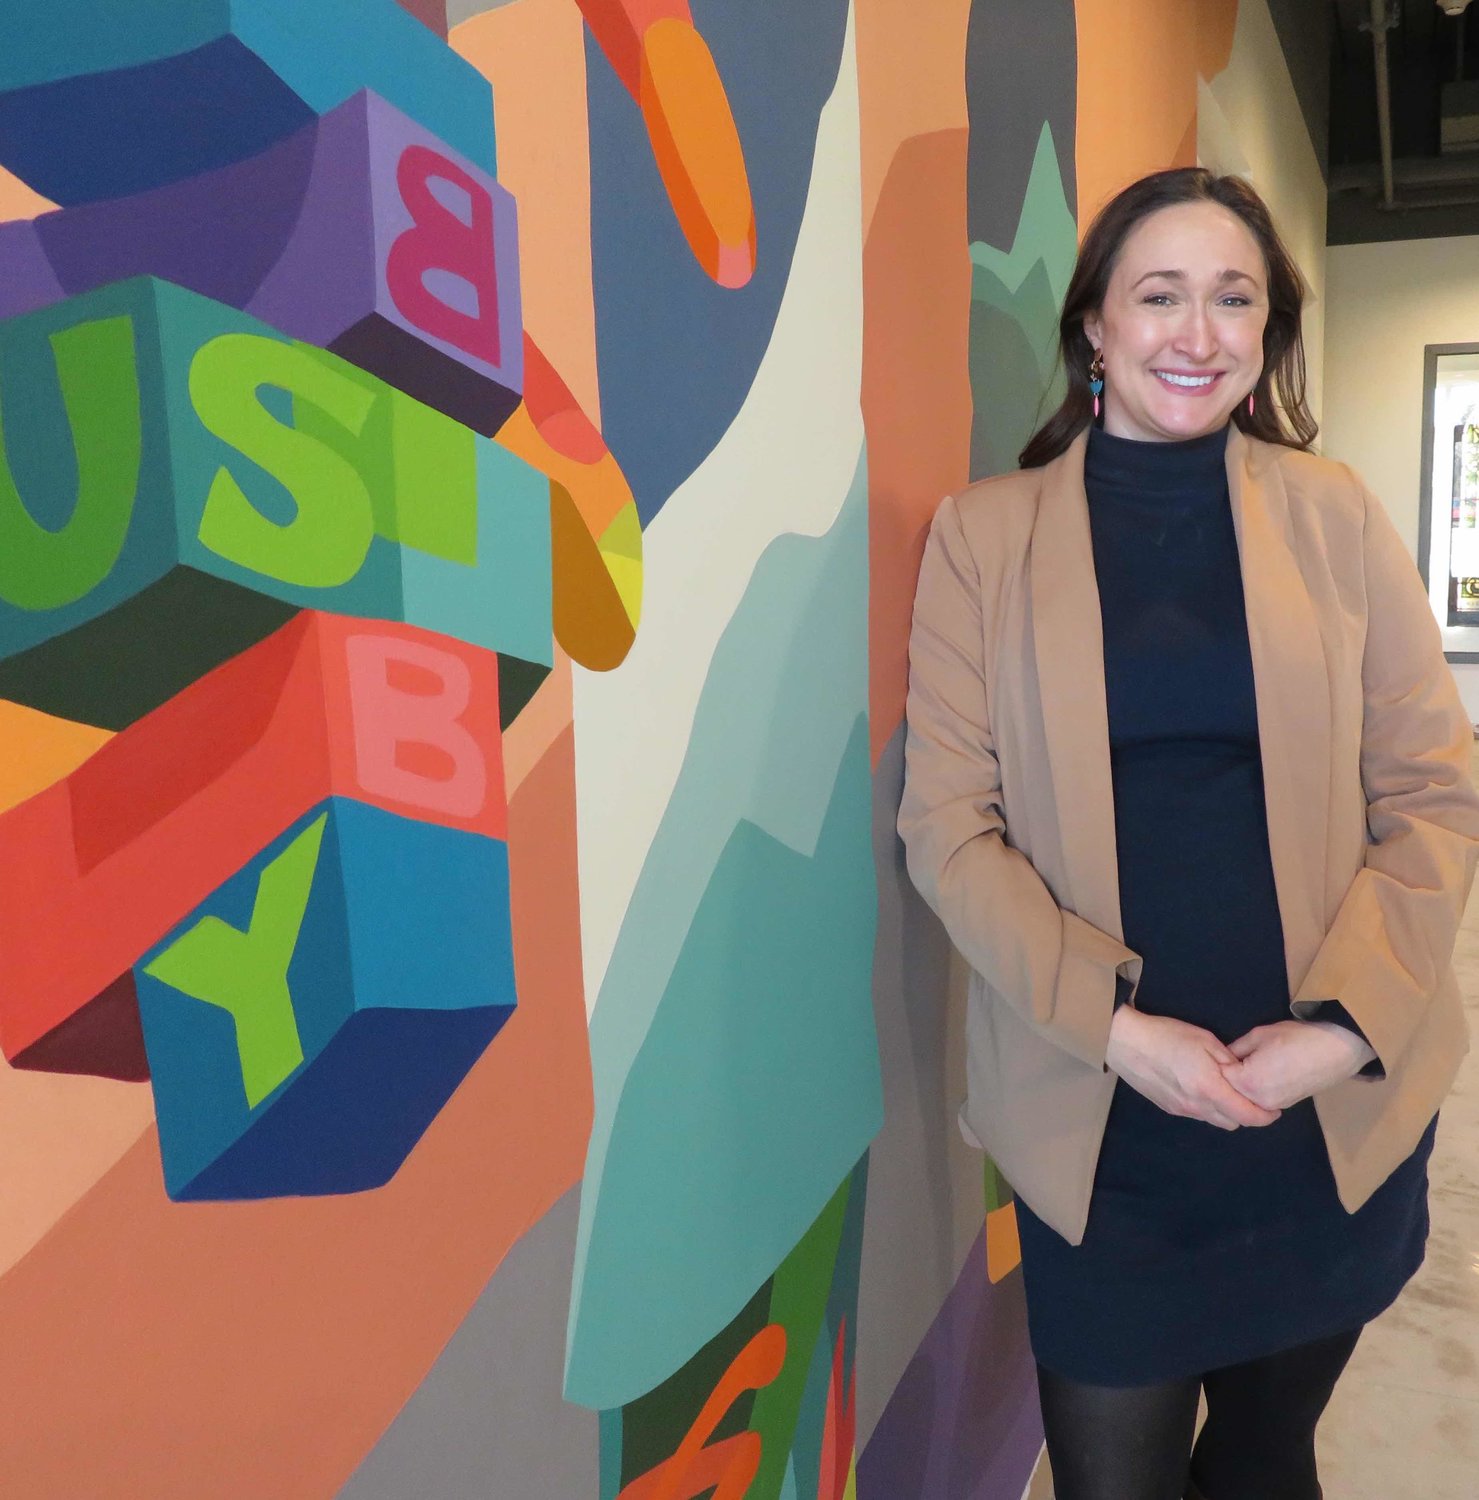 Marilyn Chrumka of Michigan Community Capital, developer of Temple Lofts, will share her non-profit’s first floor office space at the Temple Lofts with new murals and old stained glass.